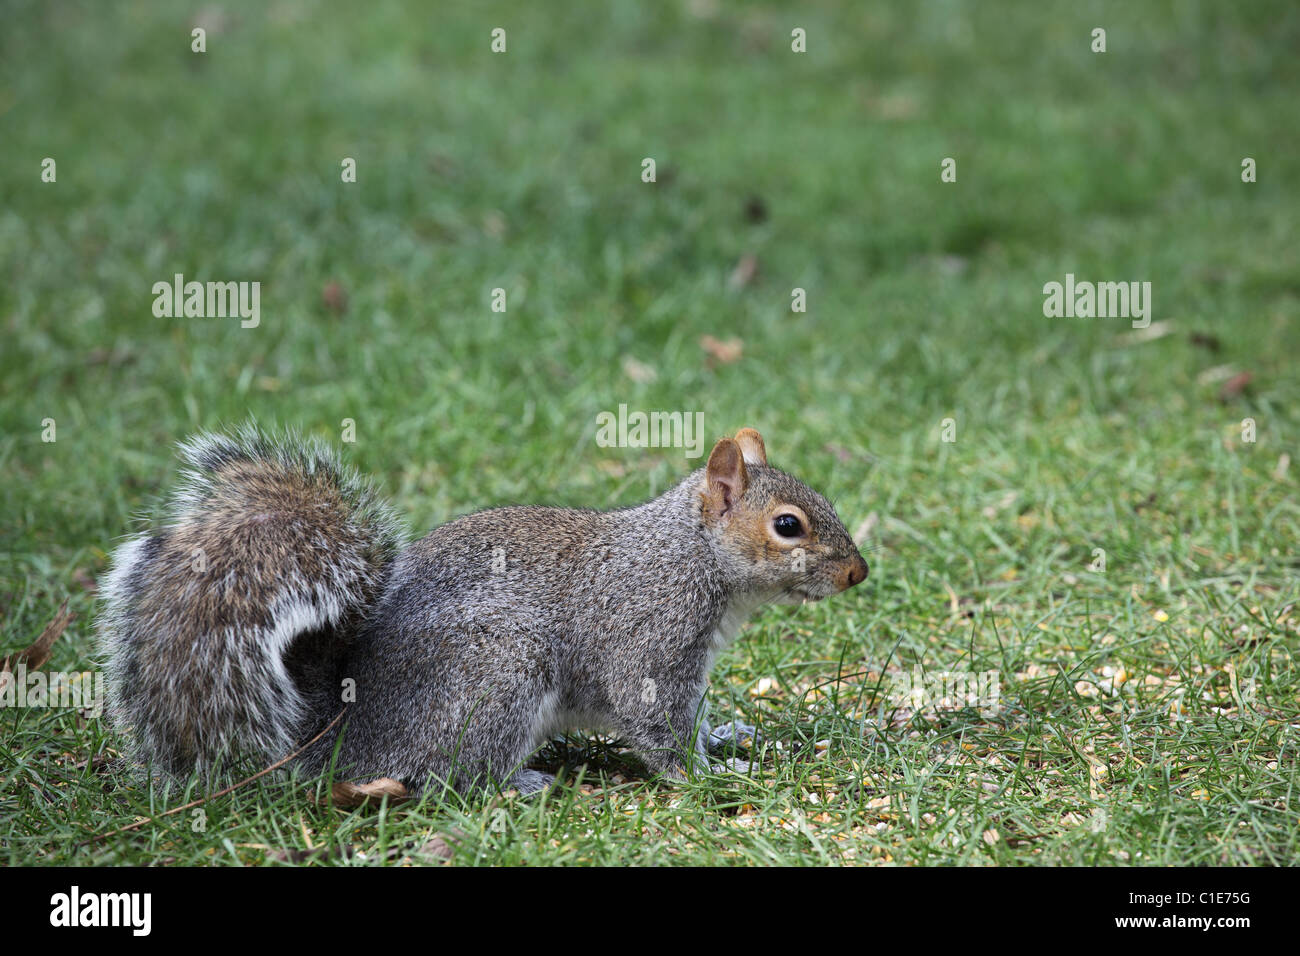 Close up of a Grey Squirrel (sciurus carolinensis) listening -  against a blurred green background Stock Photo